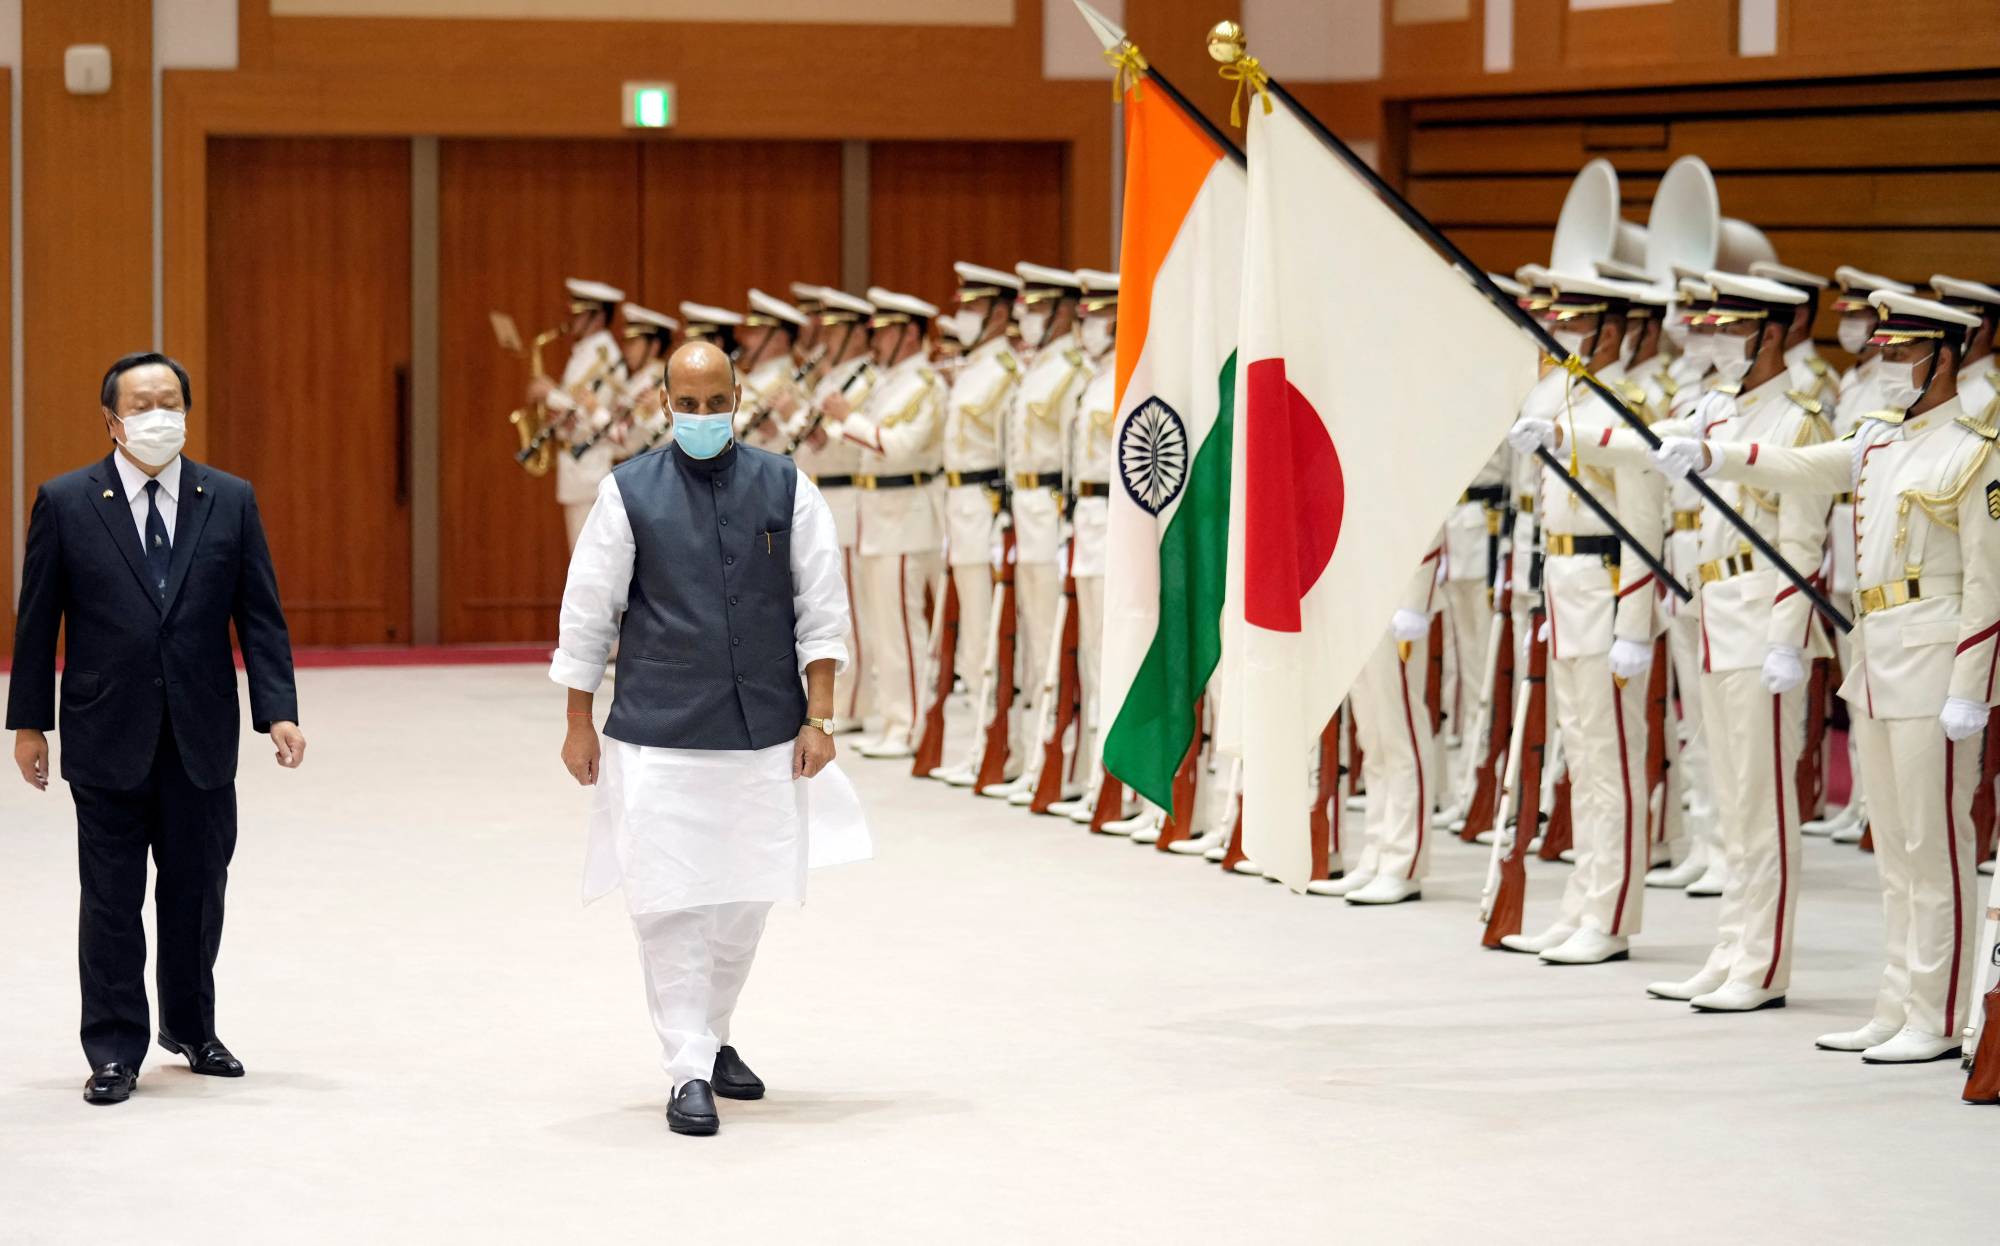 Japanese Defense Minister Yasukazu Hamada and his Indian counterpart, Rajnath Singh, attend an honor guard ceremony prior to their meeting in Tokyo on Thursday.